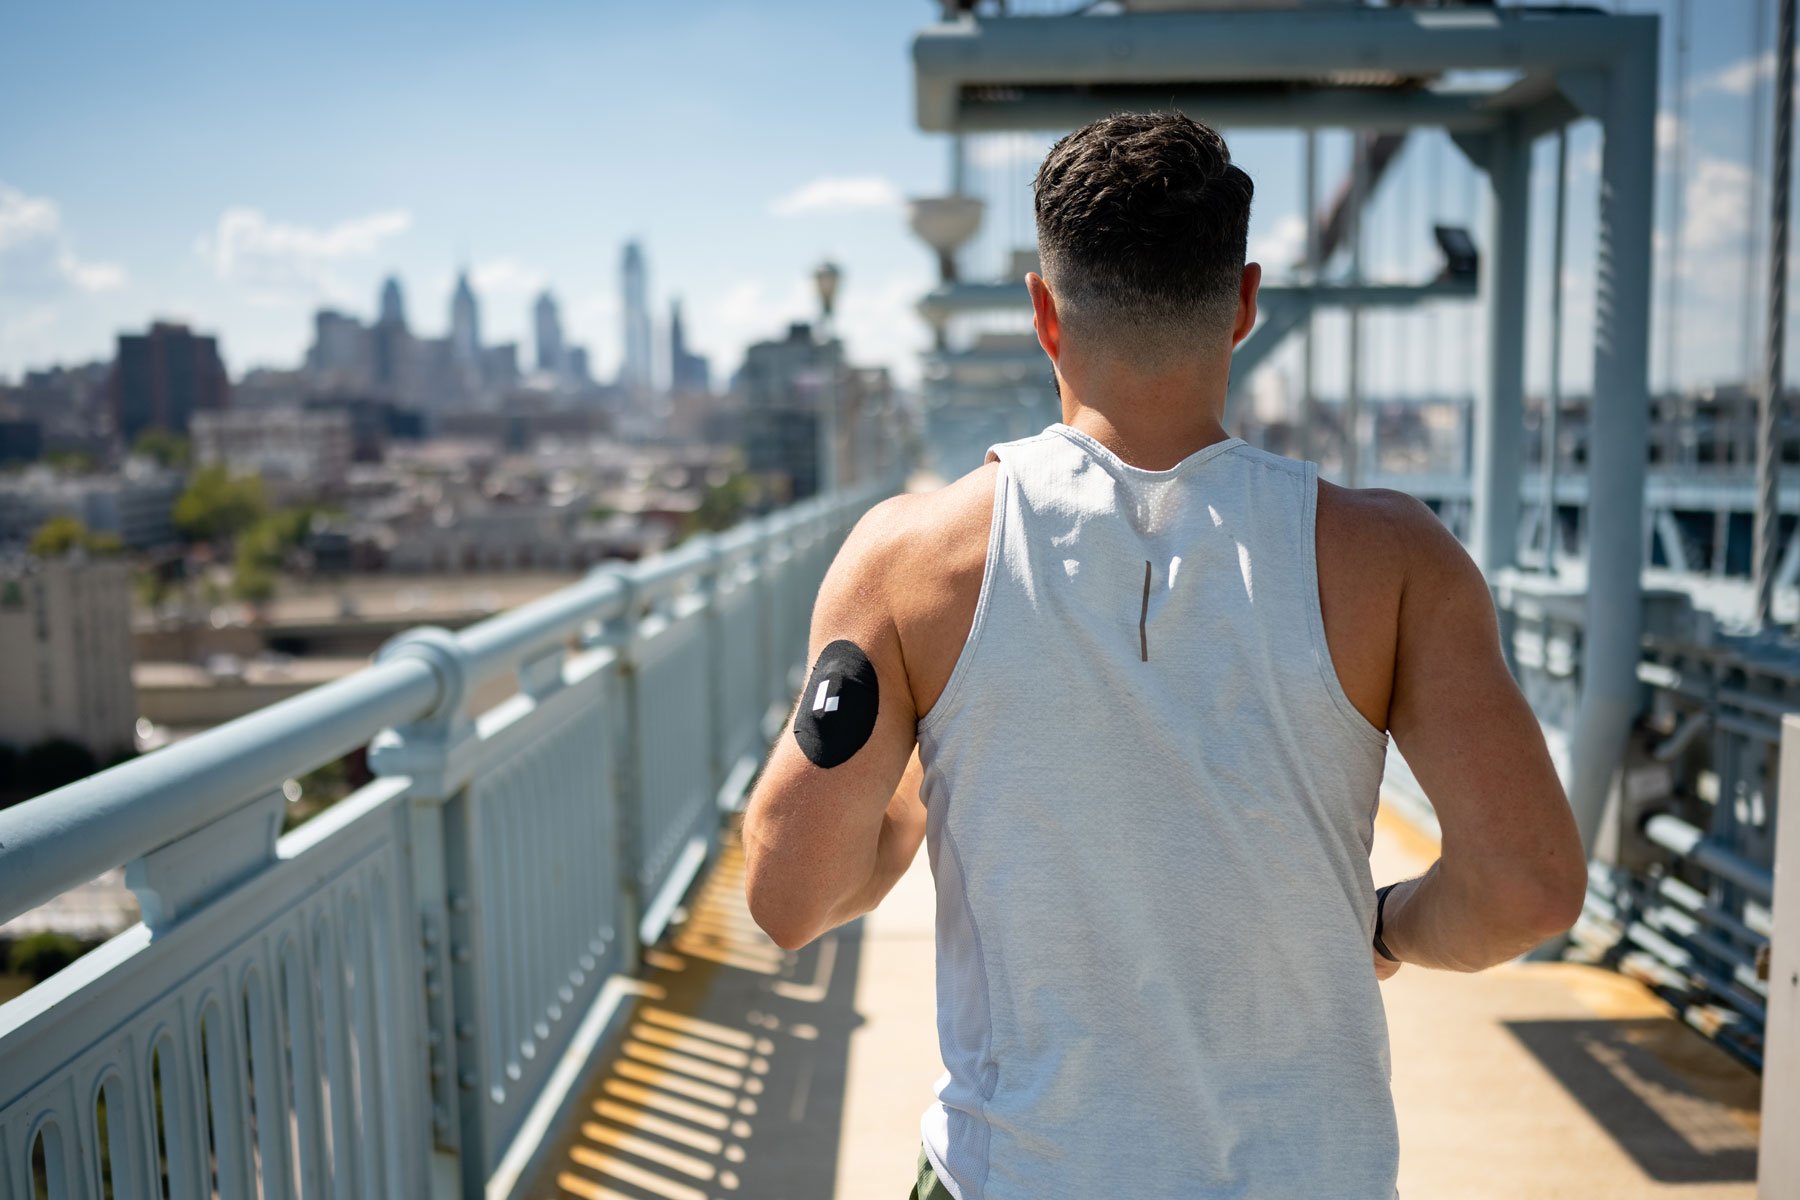 How can CGM help improve exercise performance?